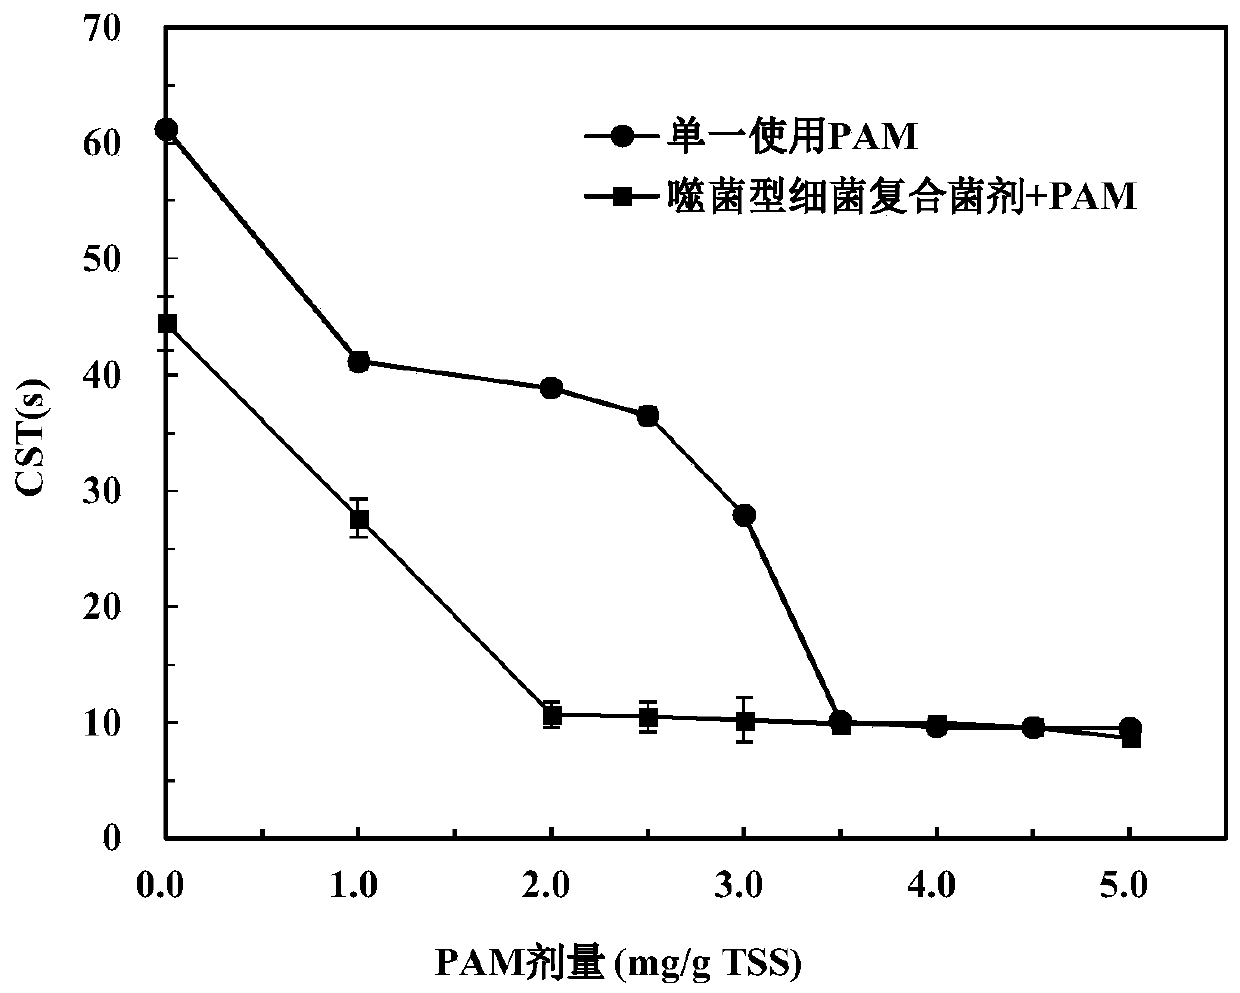 Sludge dewatering method using microbial cracking pretreatment coupled with PAM flocculant chemical flocculation